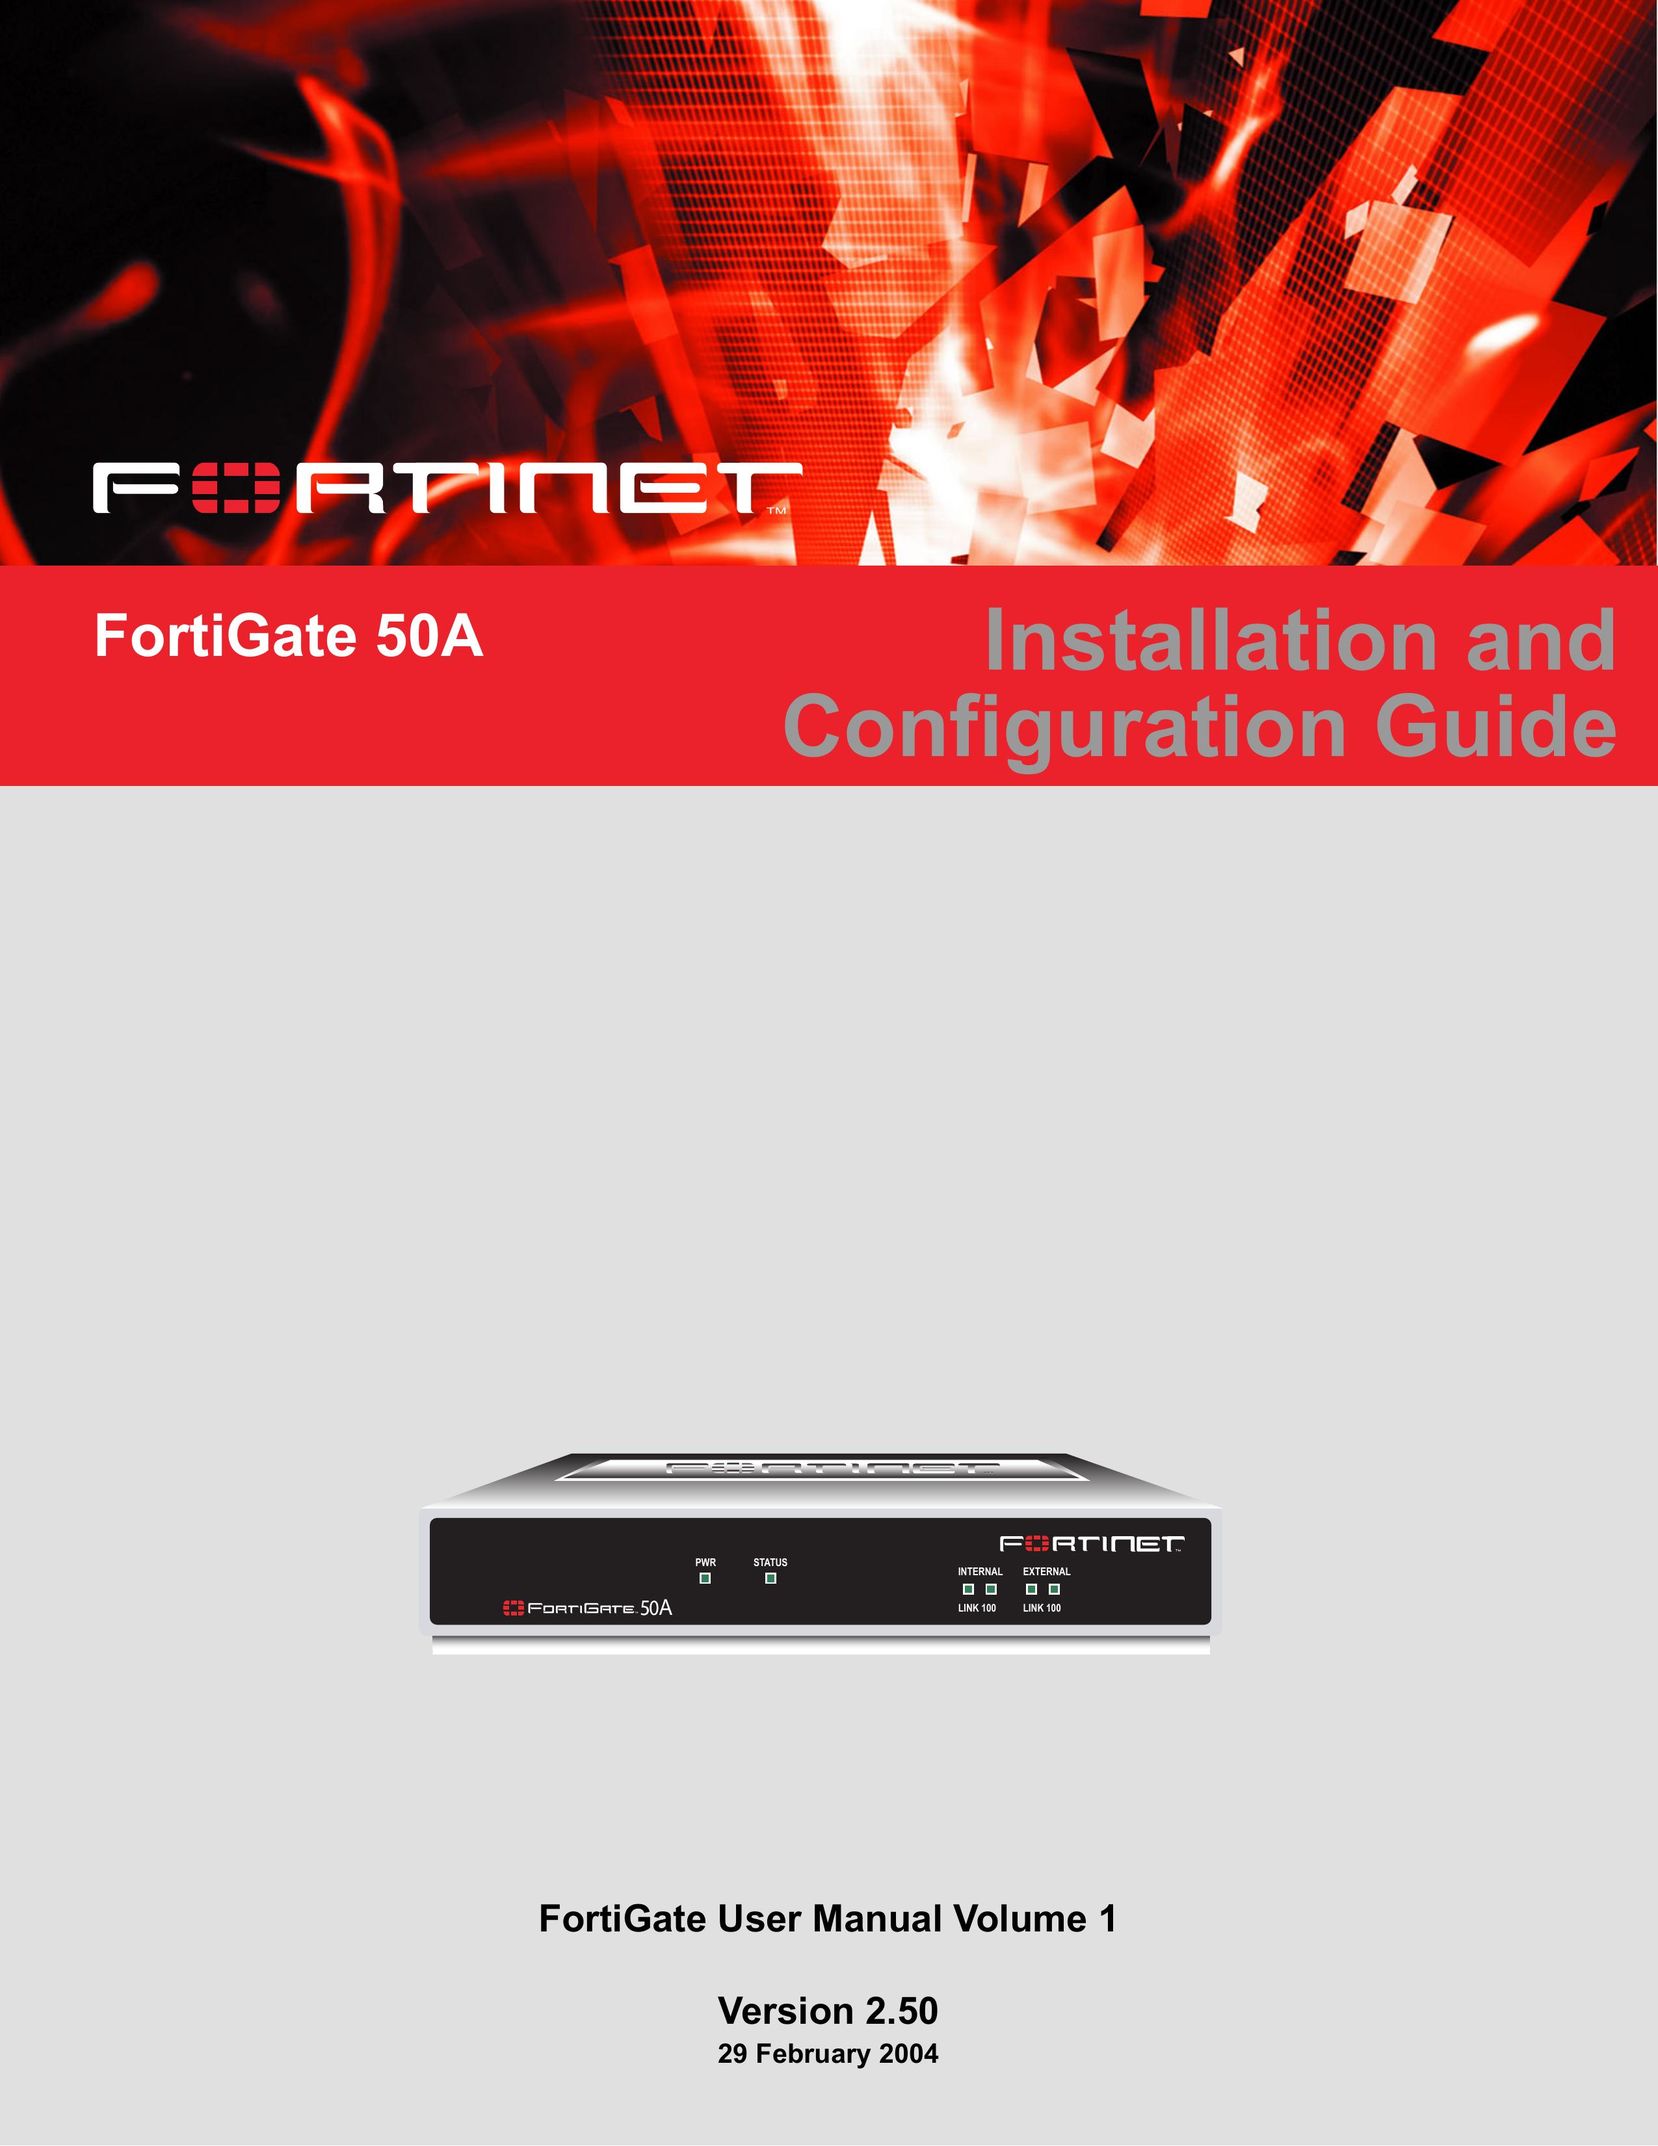 Fortinet 50A Network Card User Manual